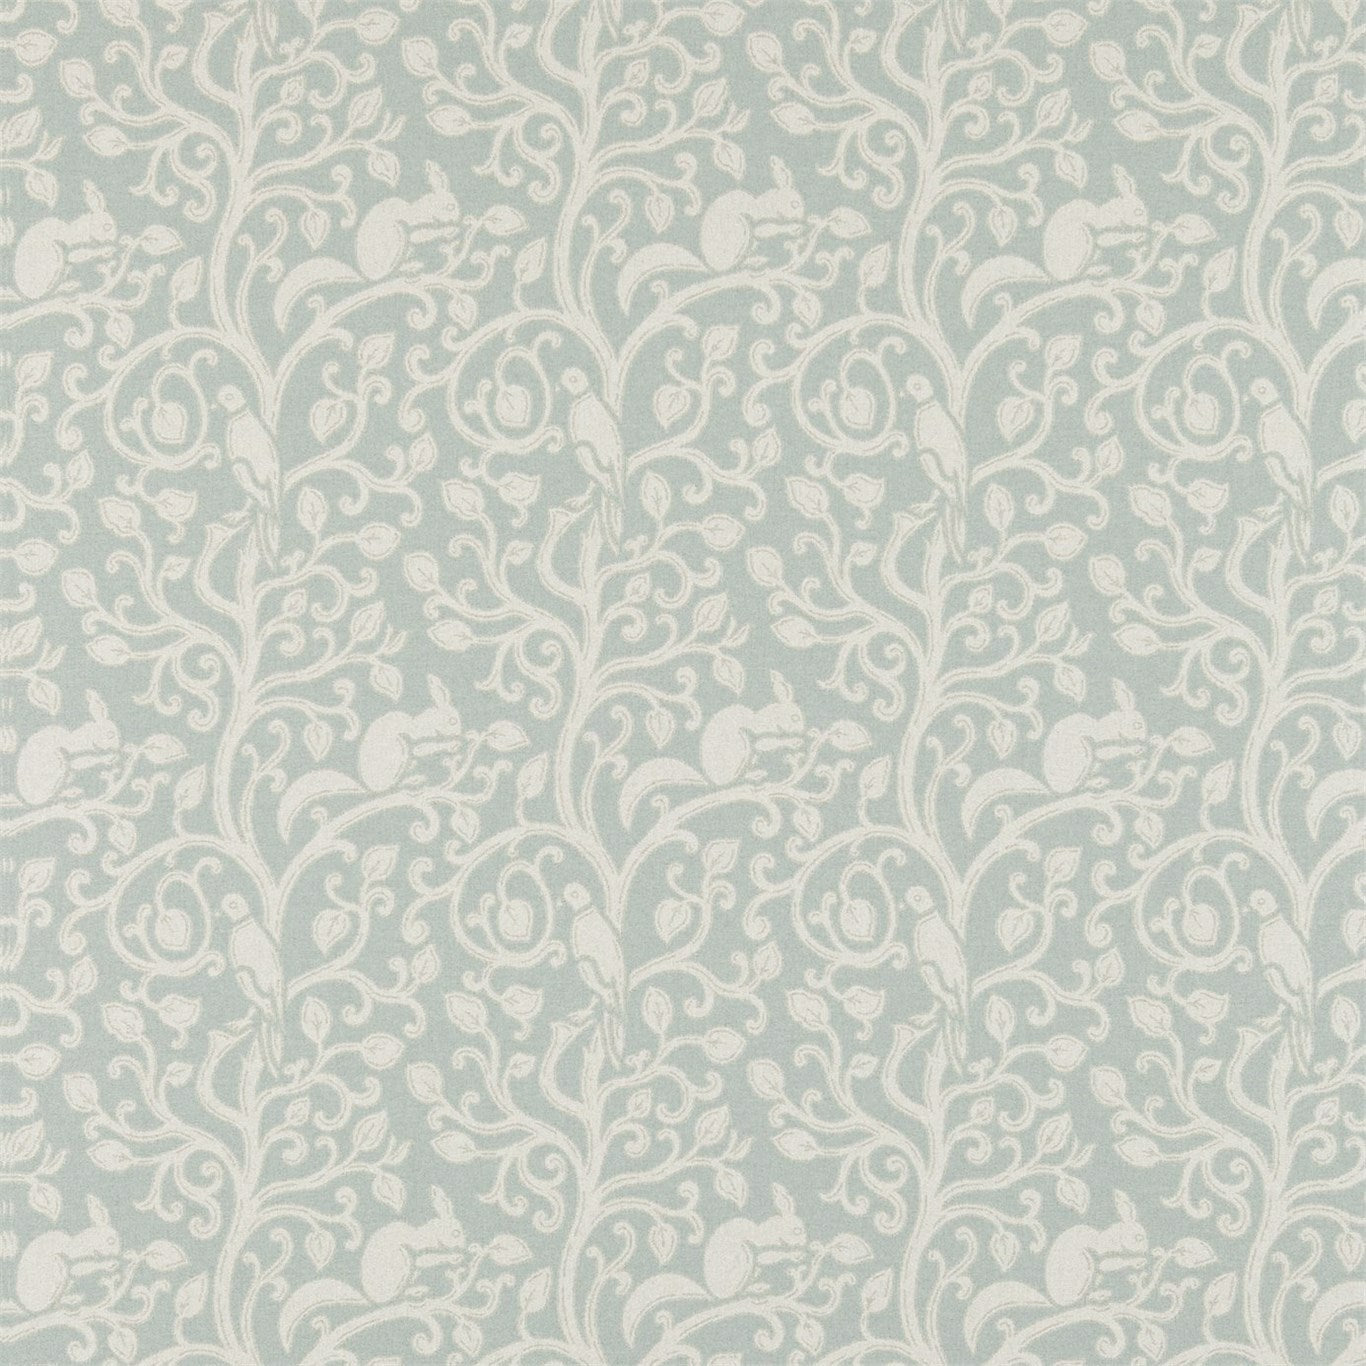 Squirrel & Dove Wool Fabric by Sanderson